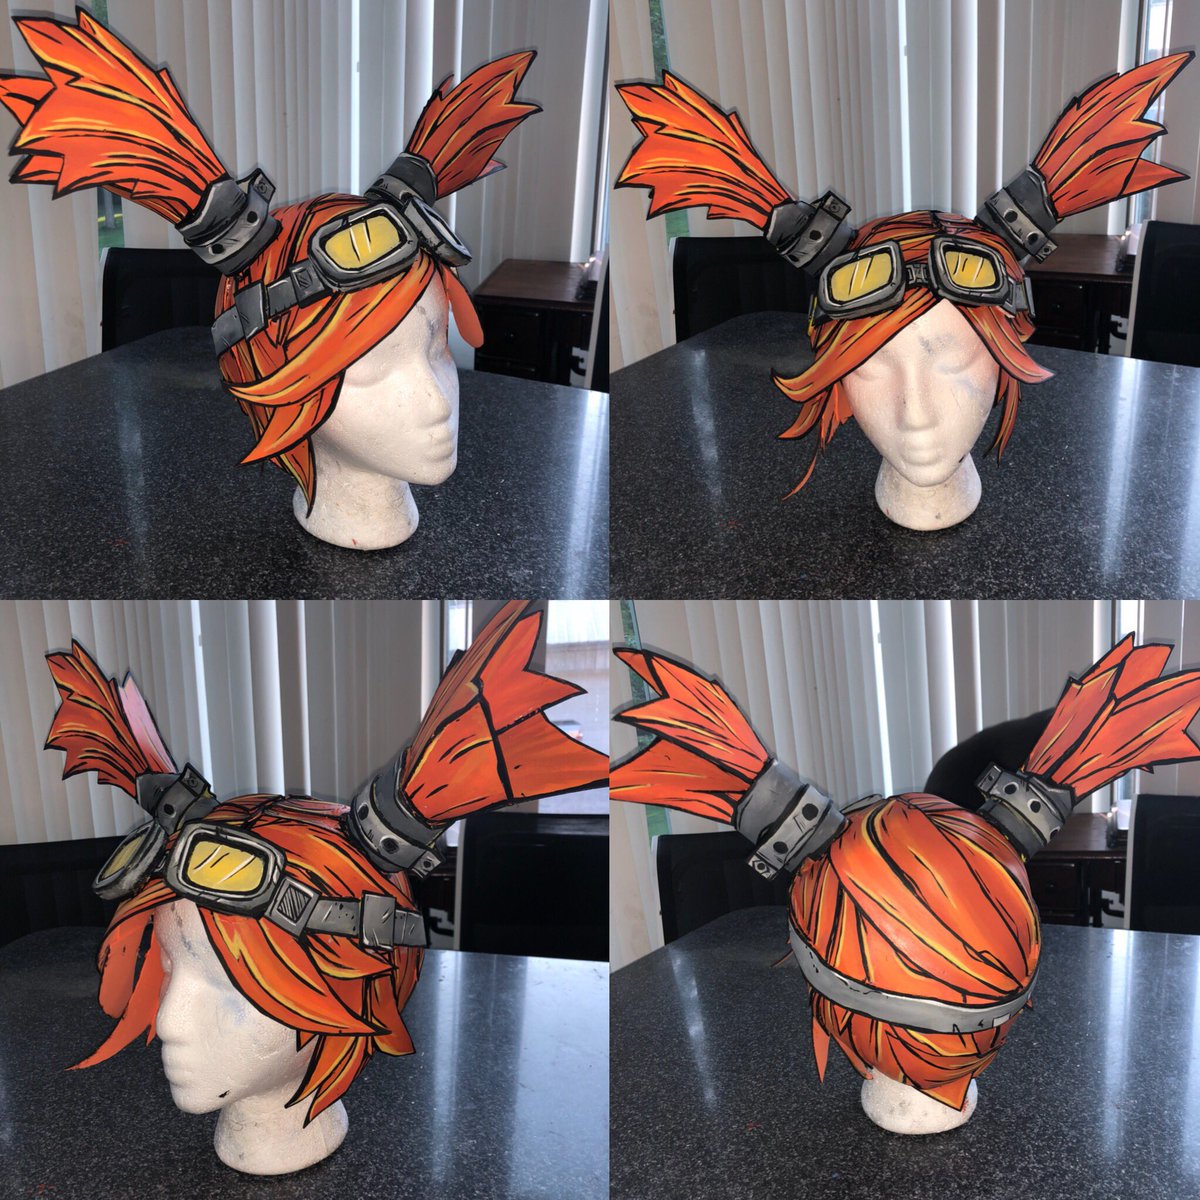 Gaige’s wig is pretty much done!! I’m so excited to be bringing a new Borderlands costume to dragon*con! I made this out of craft foam and then painted it by hand :D